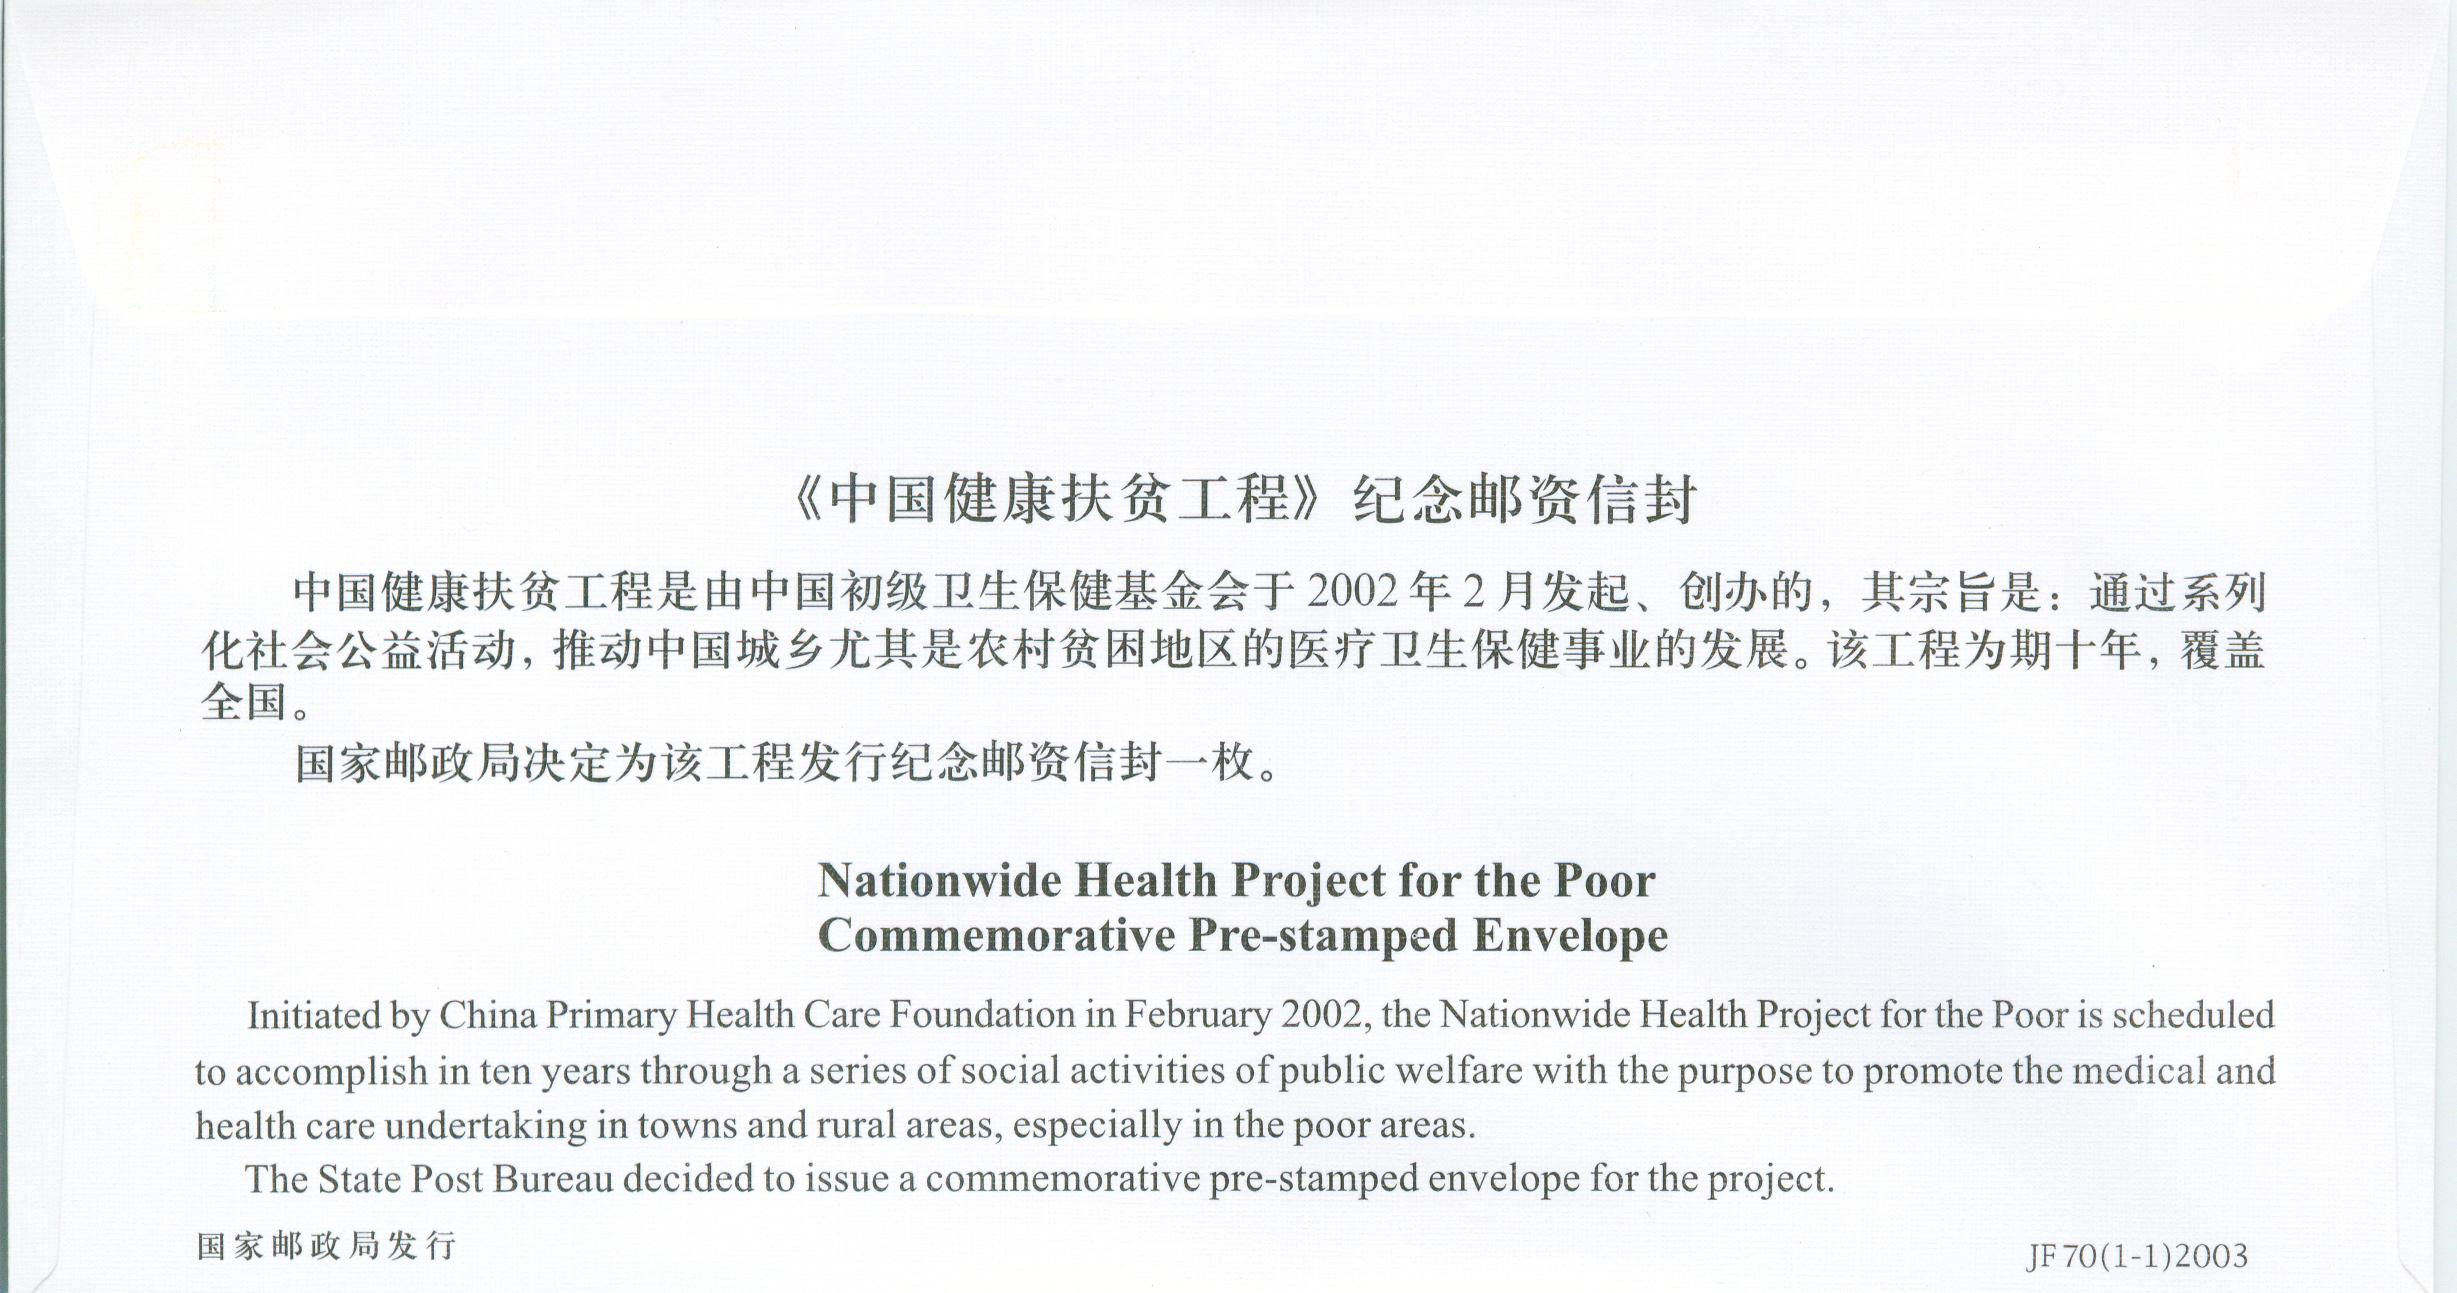 JF70 National Health Project for the Poor 2003